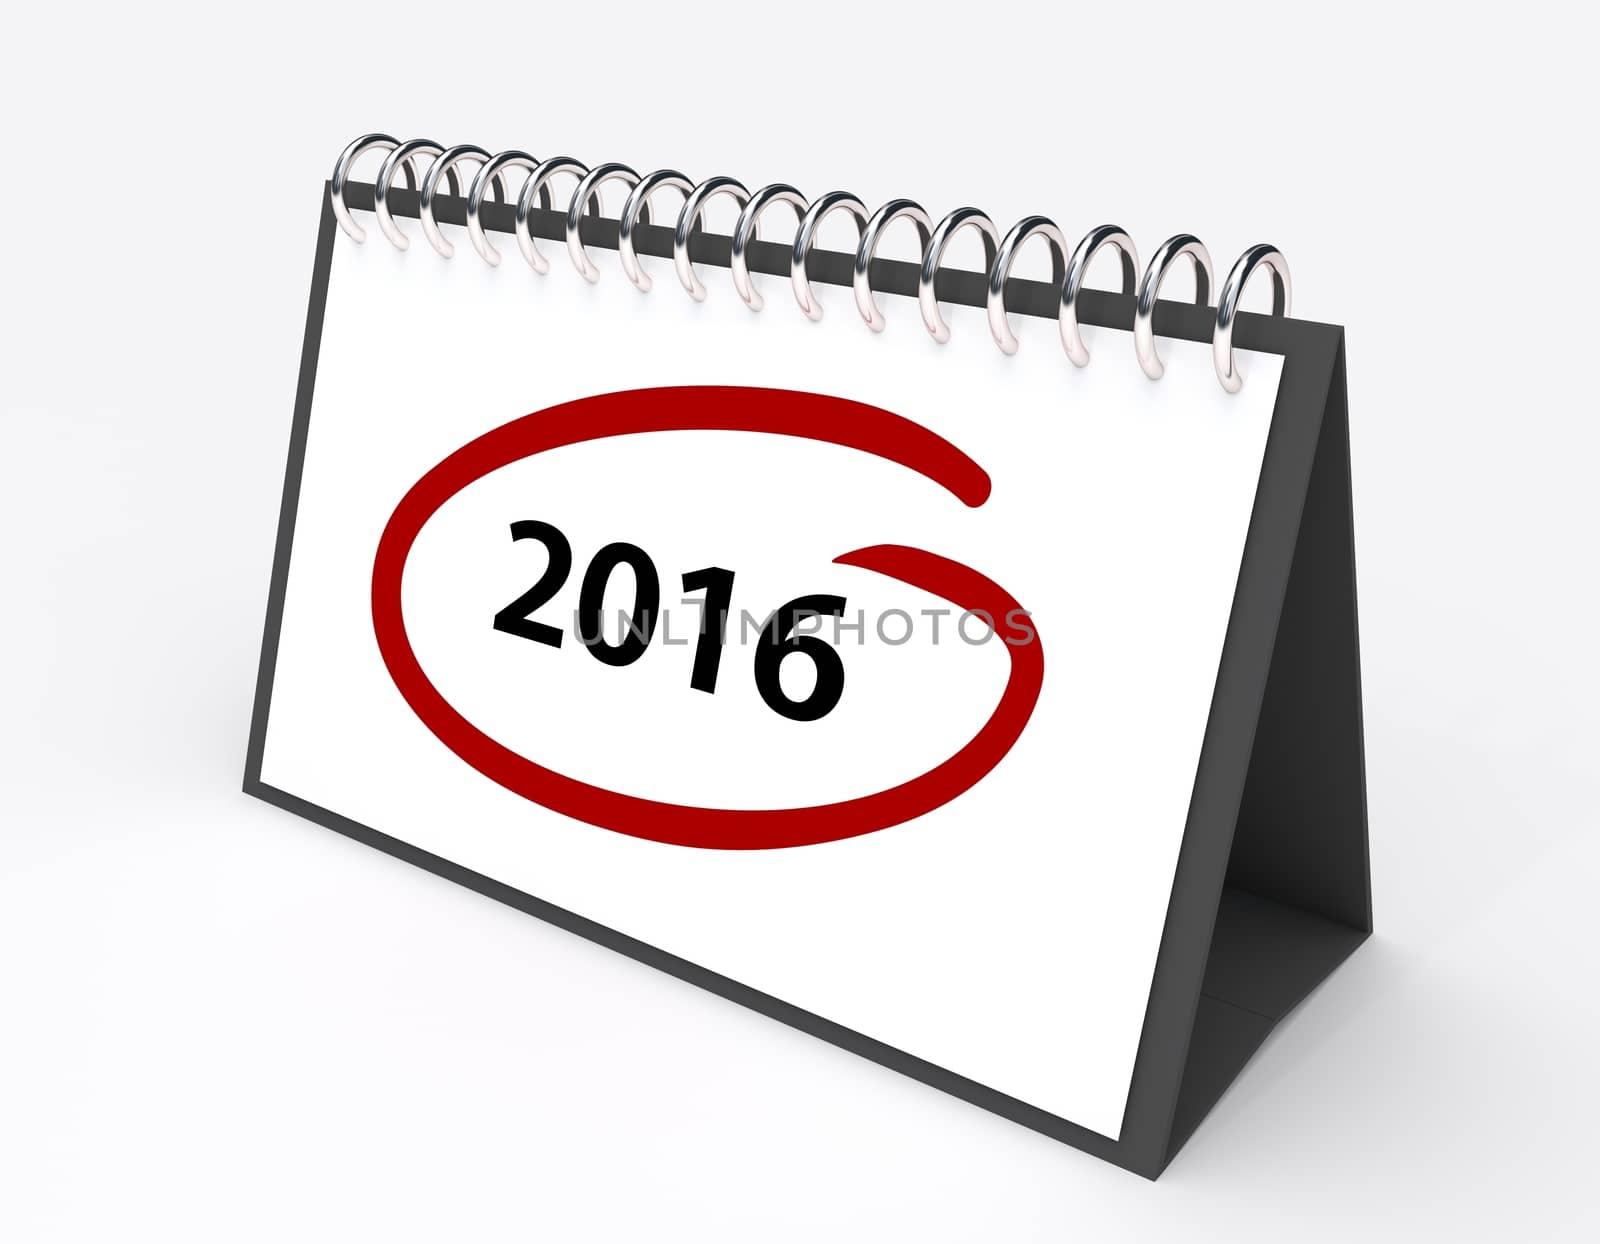 Calendar with the year 2016 circled in red